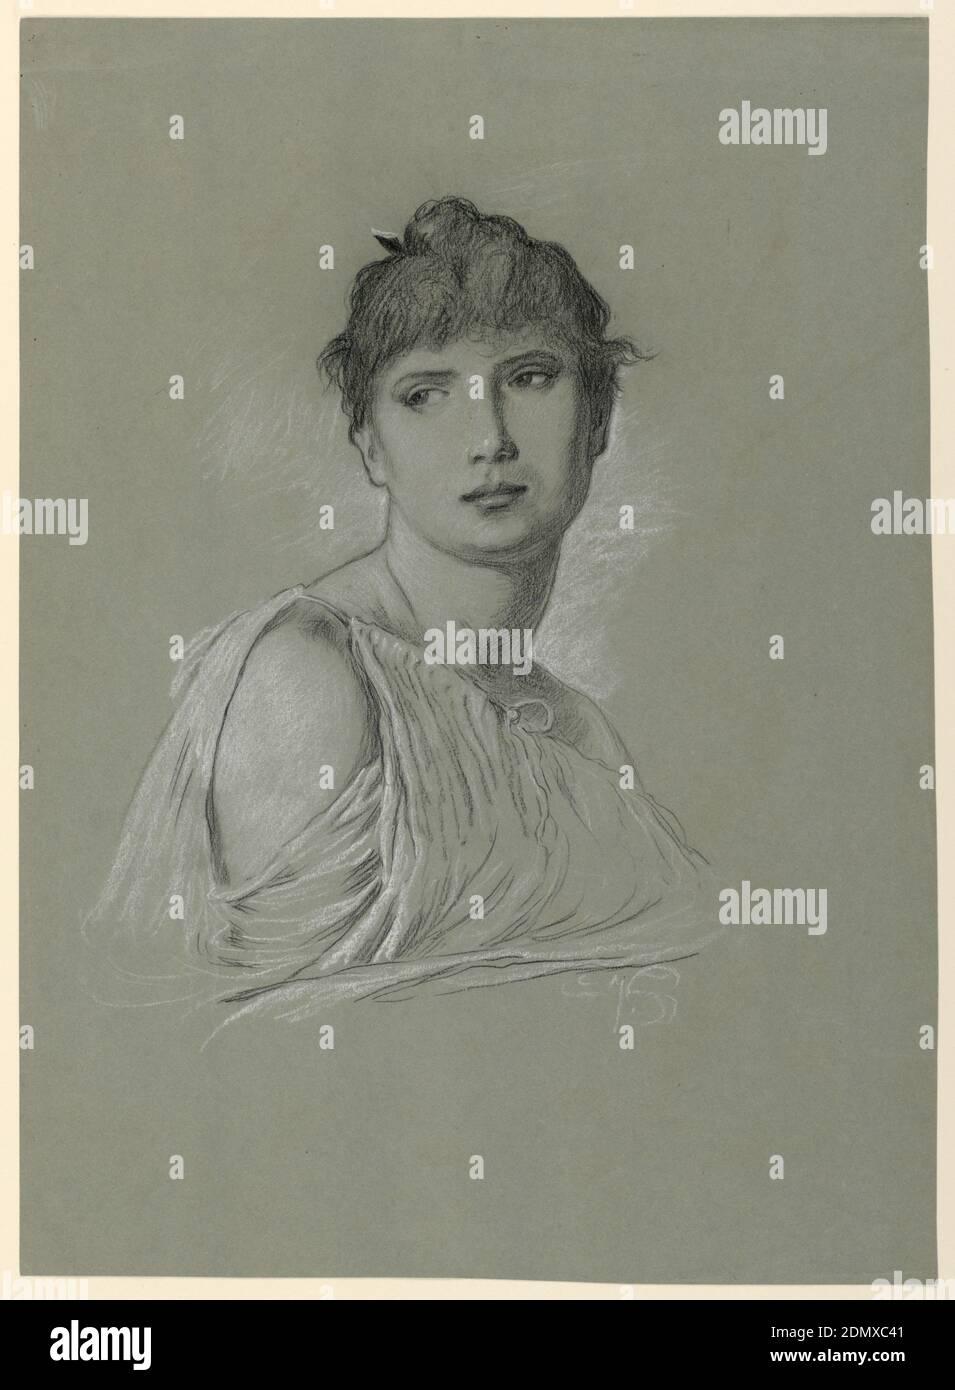 Portrait Sketch of a Young Woman, Elihu Vedder, American, 1836 – 1923, Black crayon, white chalk, on gray paper, Bust-length portrait of a young woman, turned toward the right, her head shown full-face looking at the viewer., USA, ca. 1885, portraits, Drawing Stock Photo